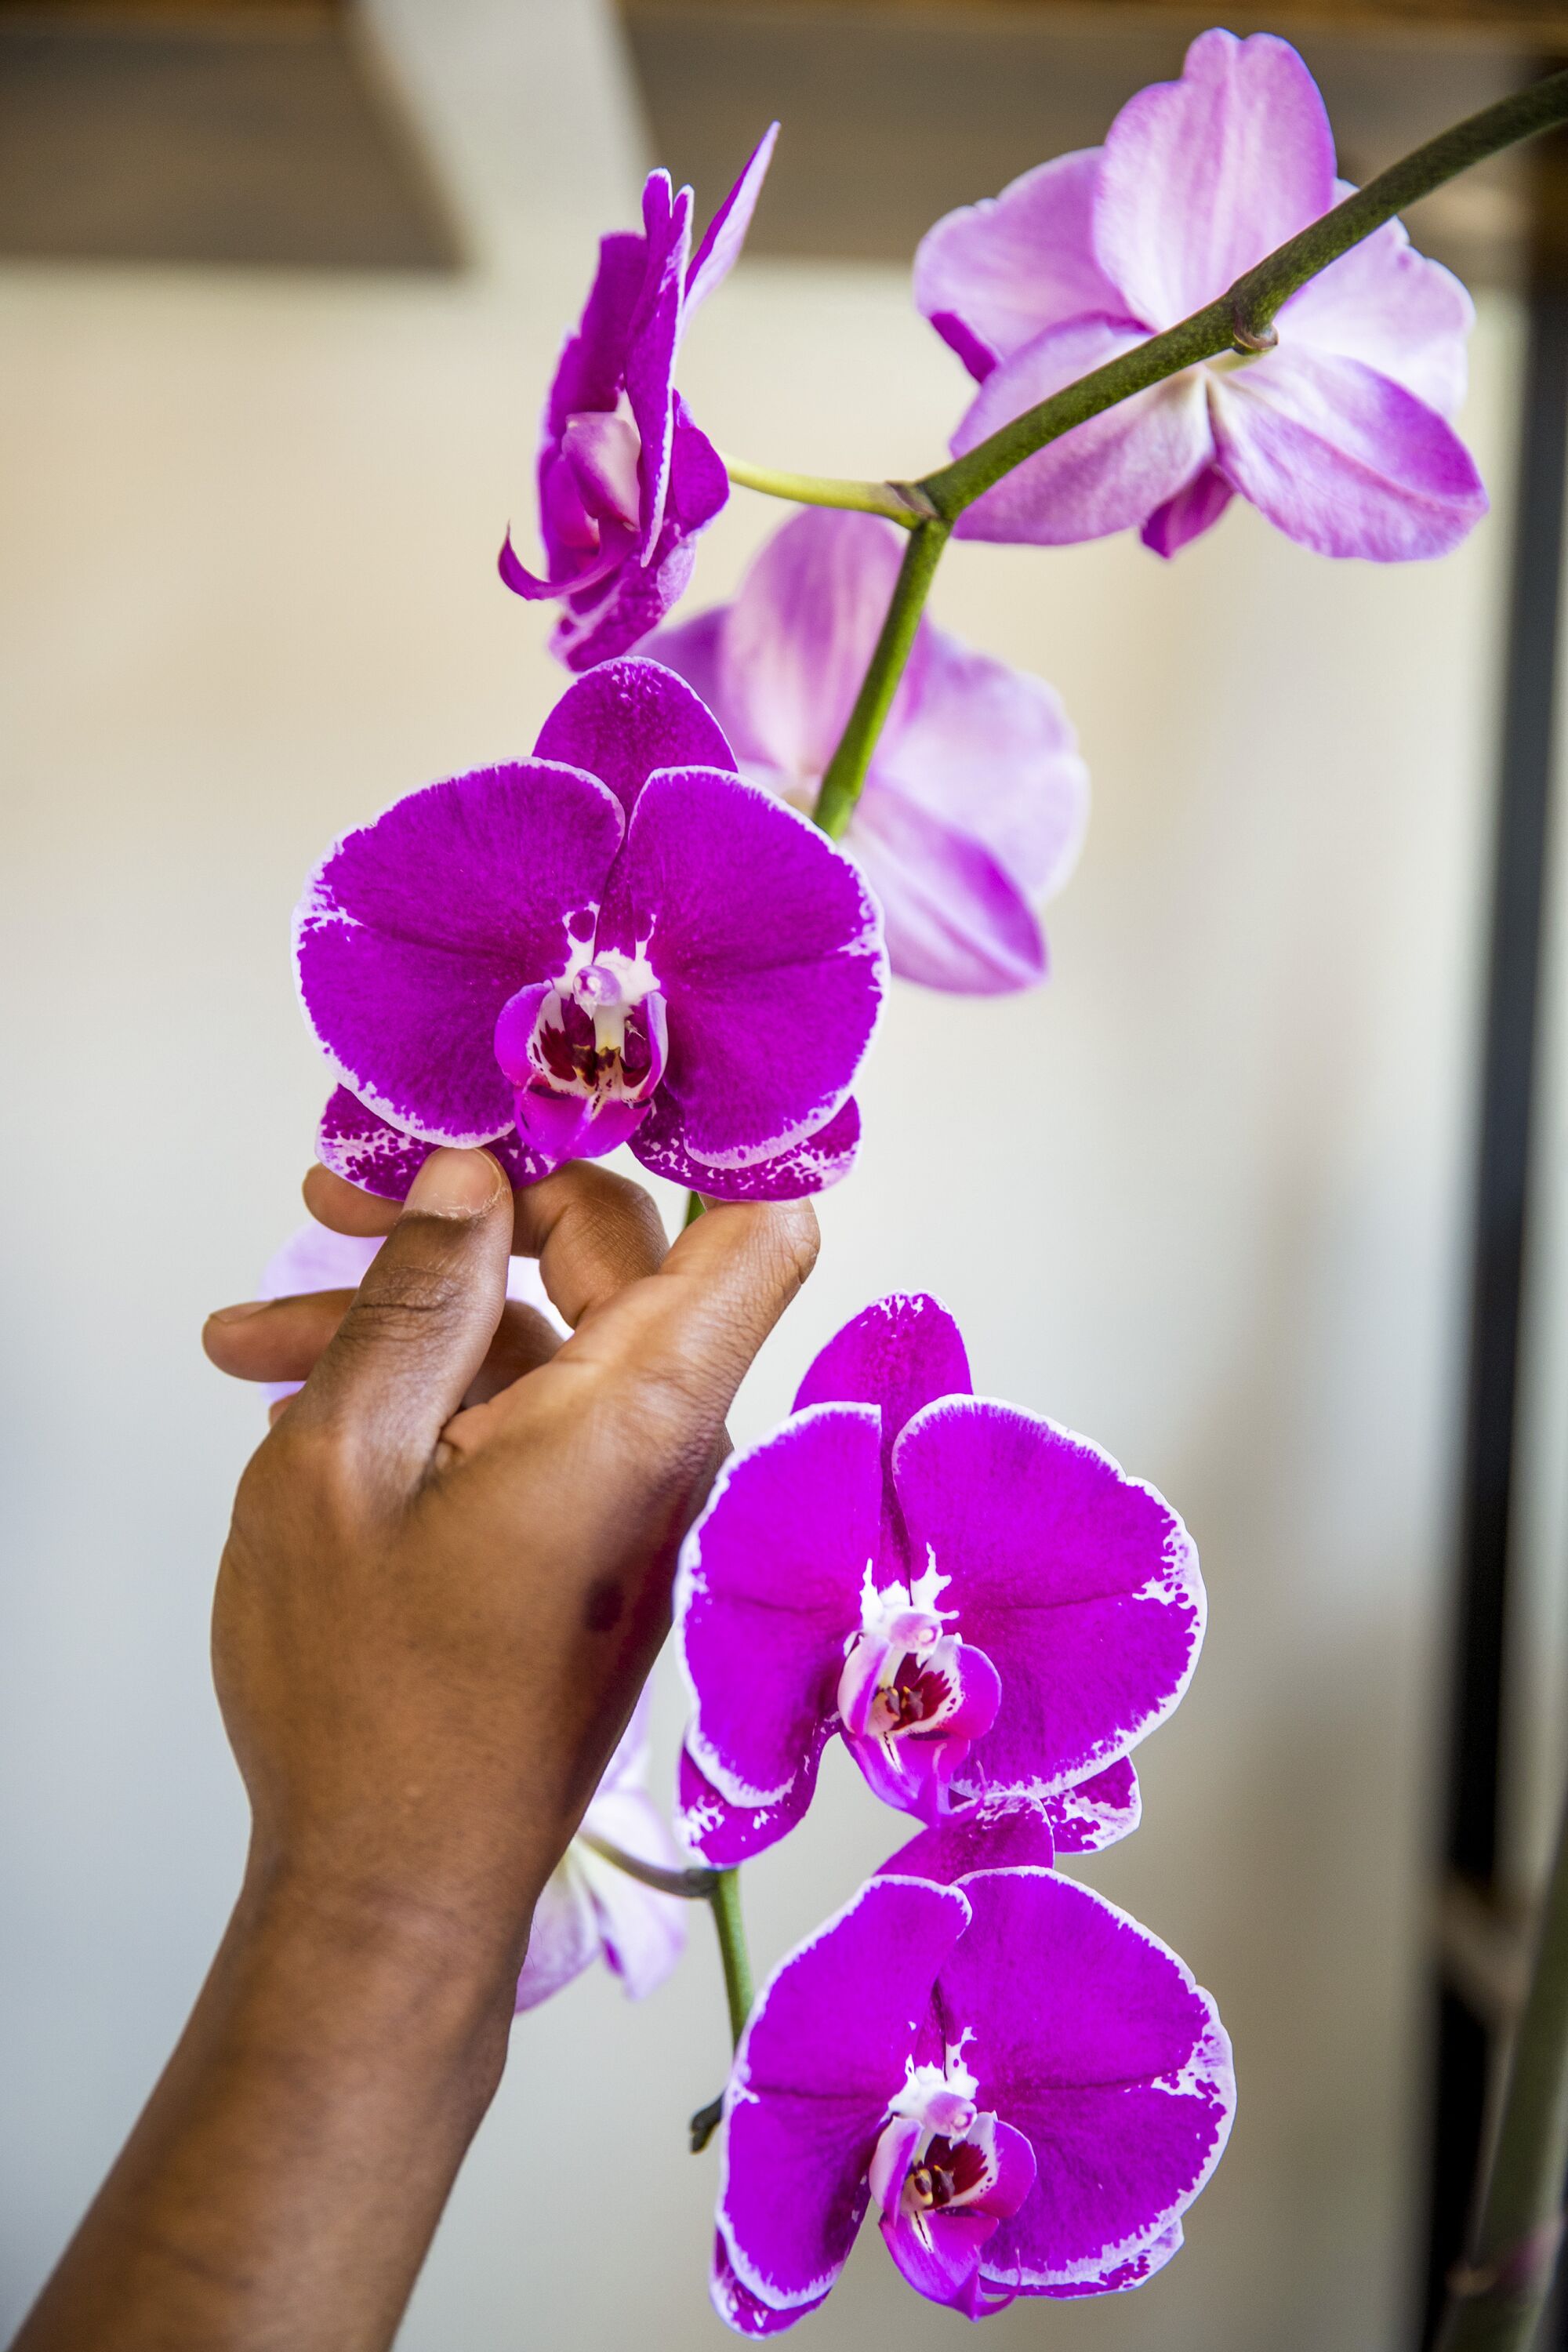 A hand reaches up to the purple flowers of an orchid.